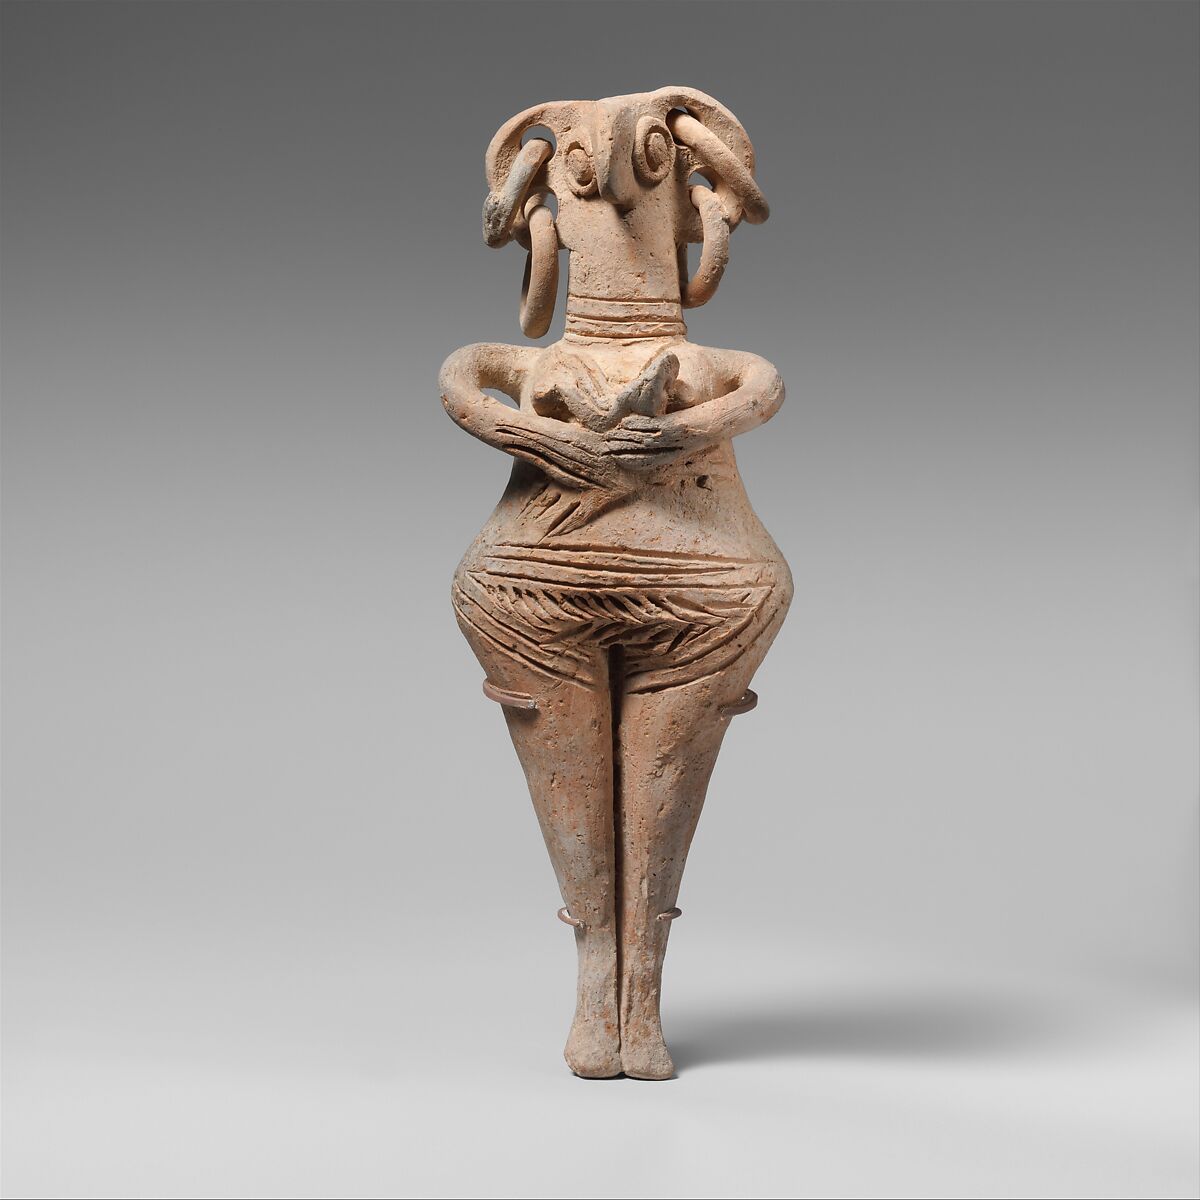 Terracotta statuette of woman with bird face, Terracotta, Cypriot 